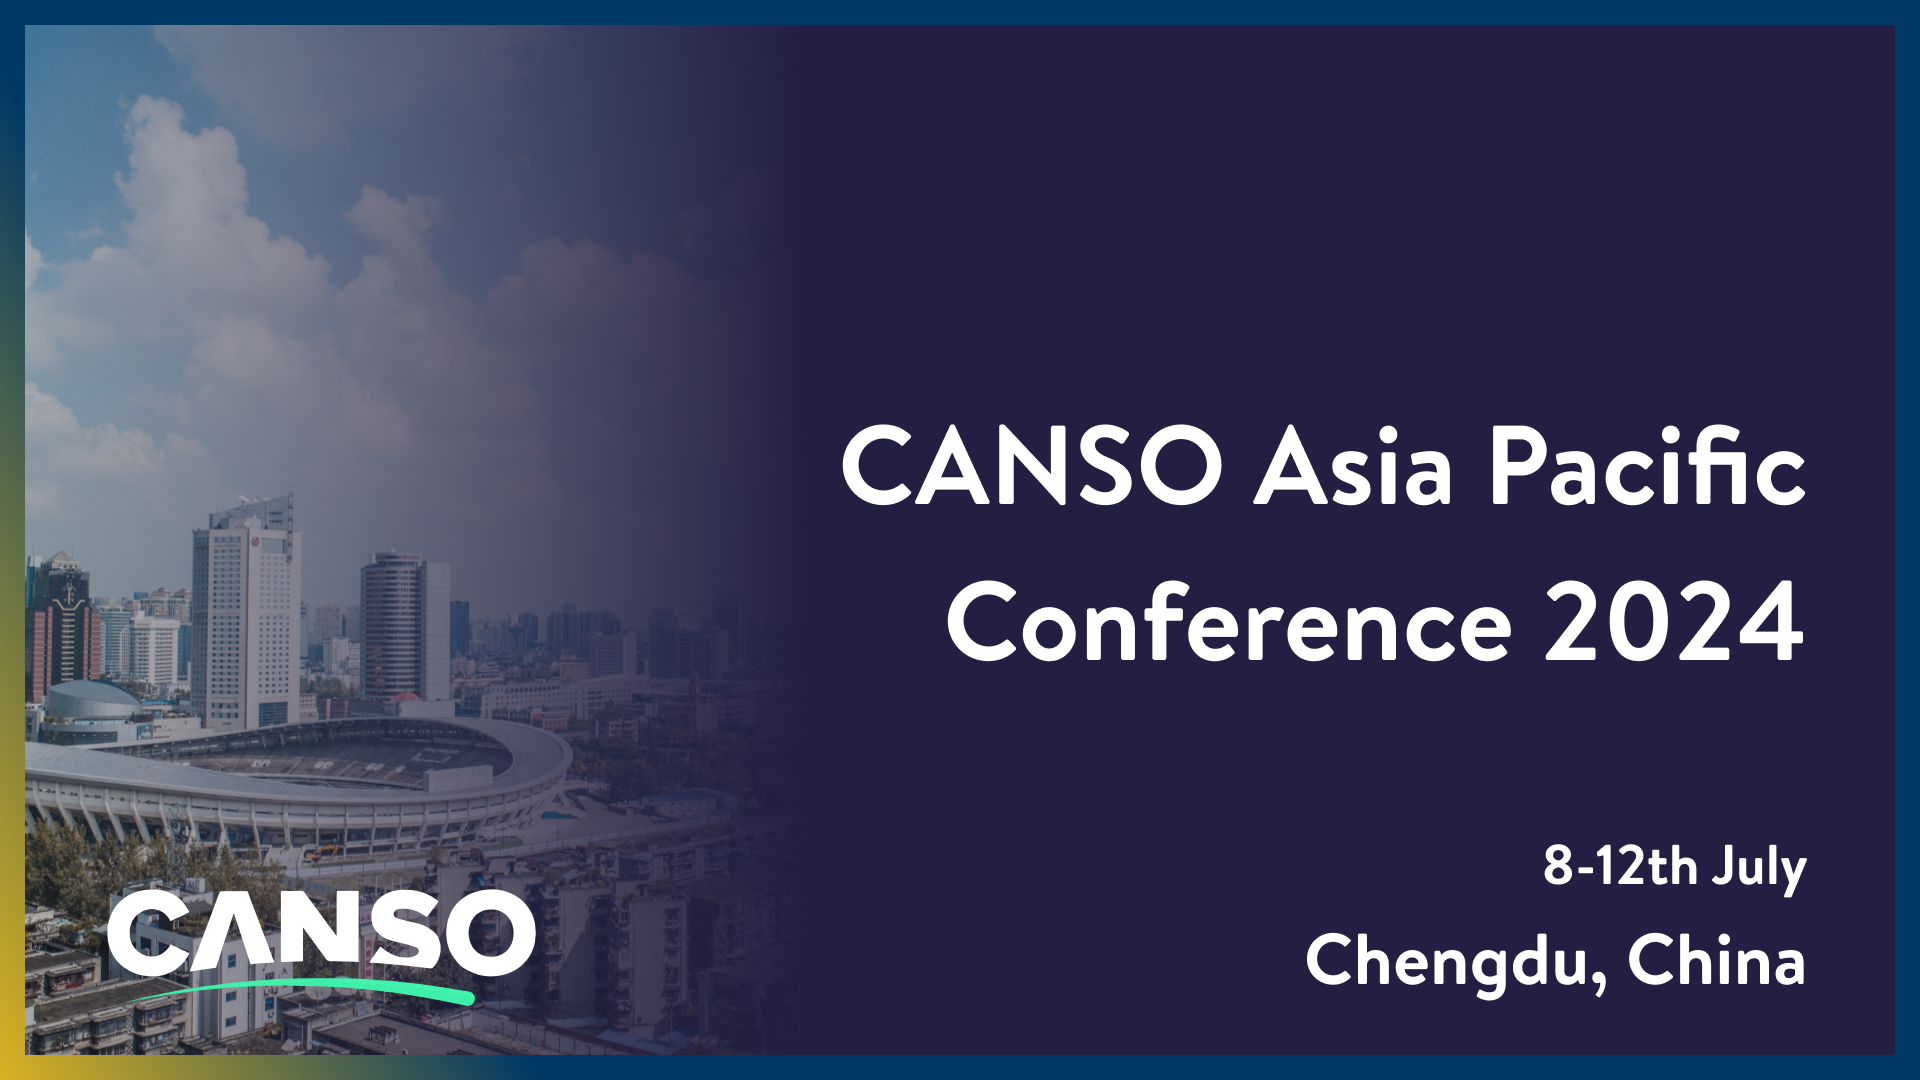 CANSO APAC